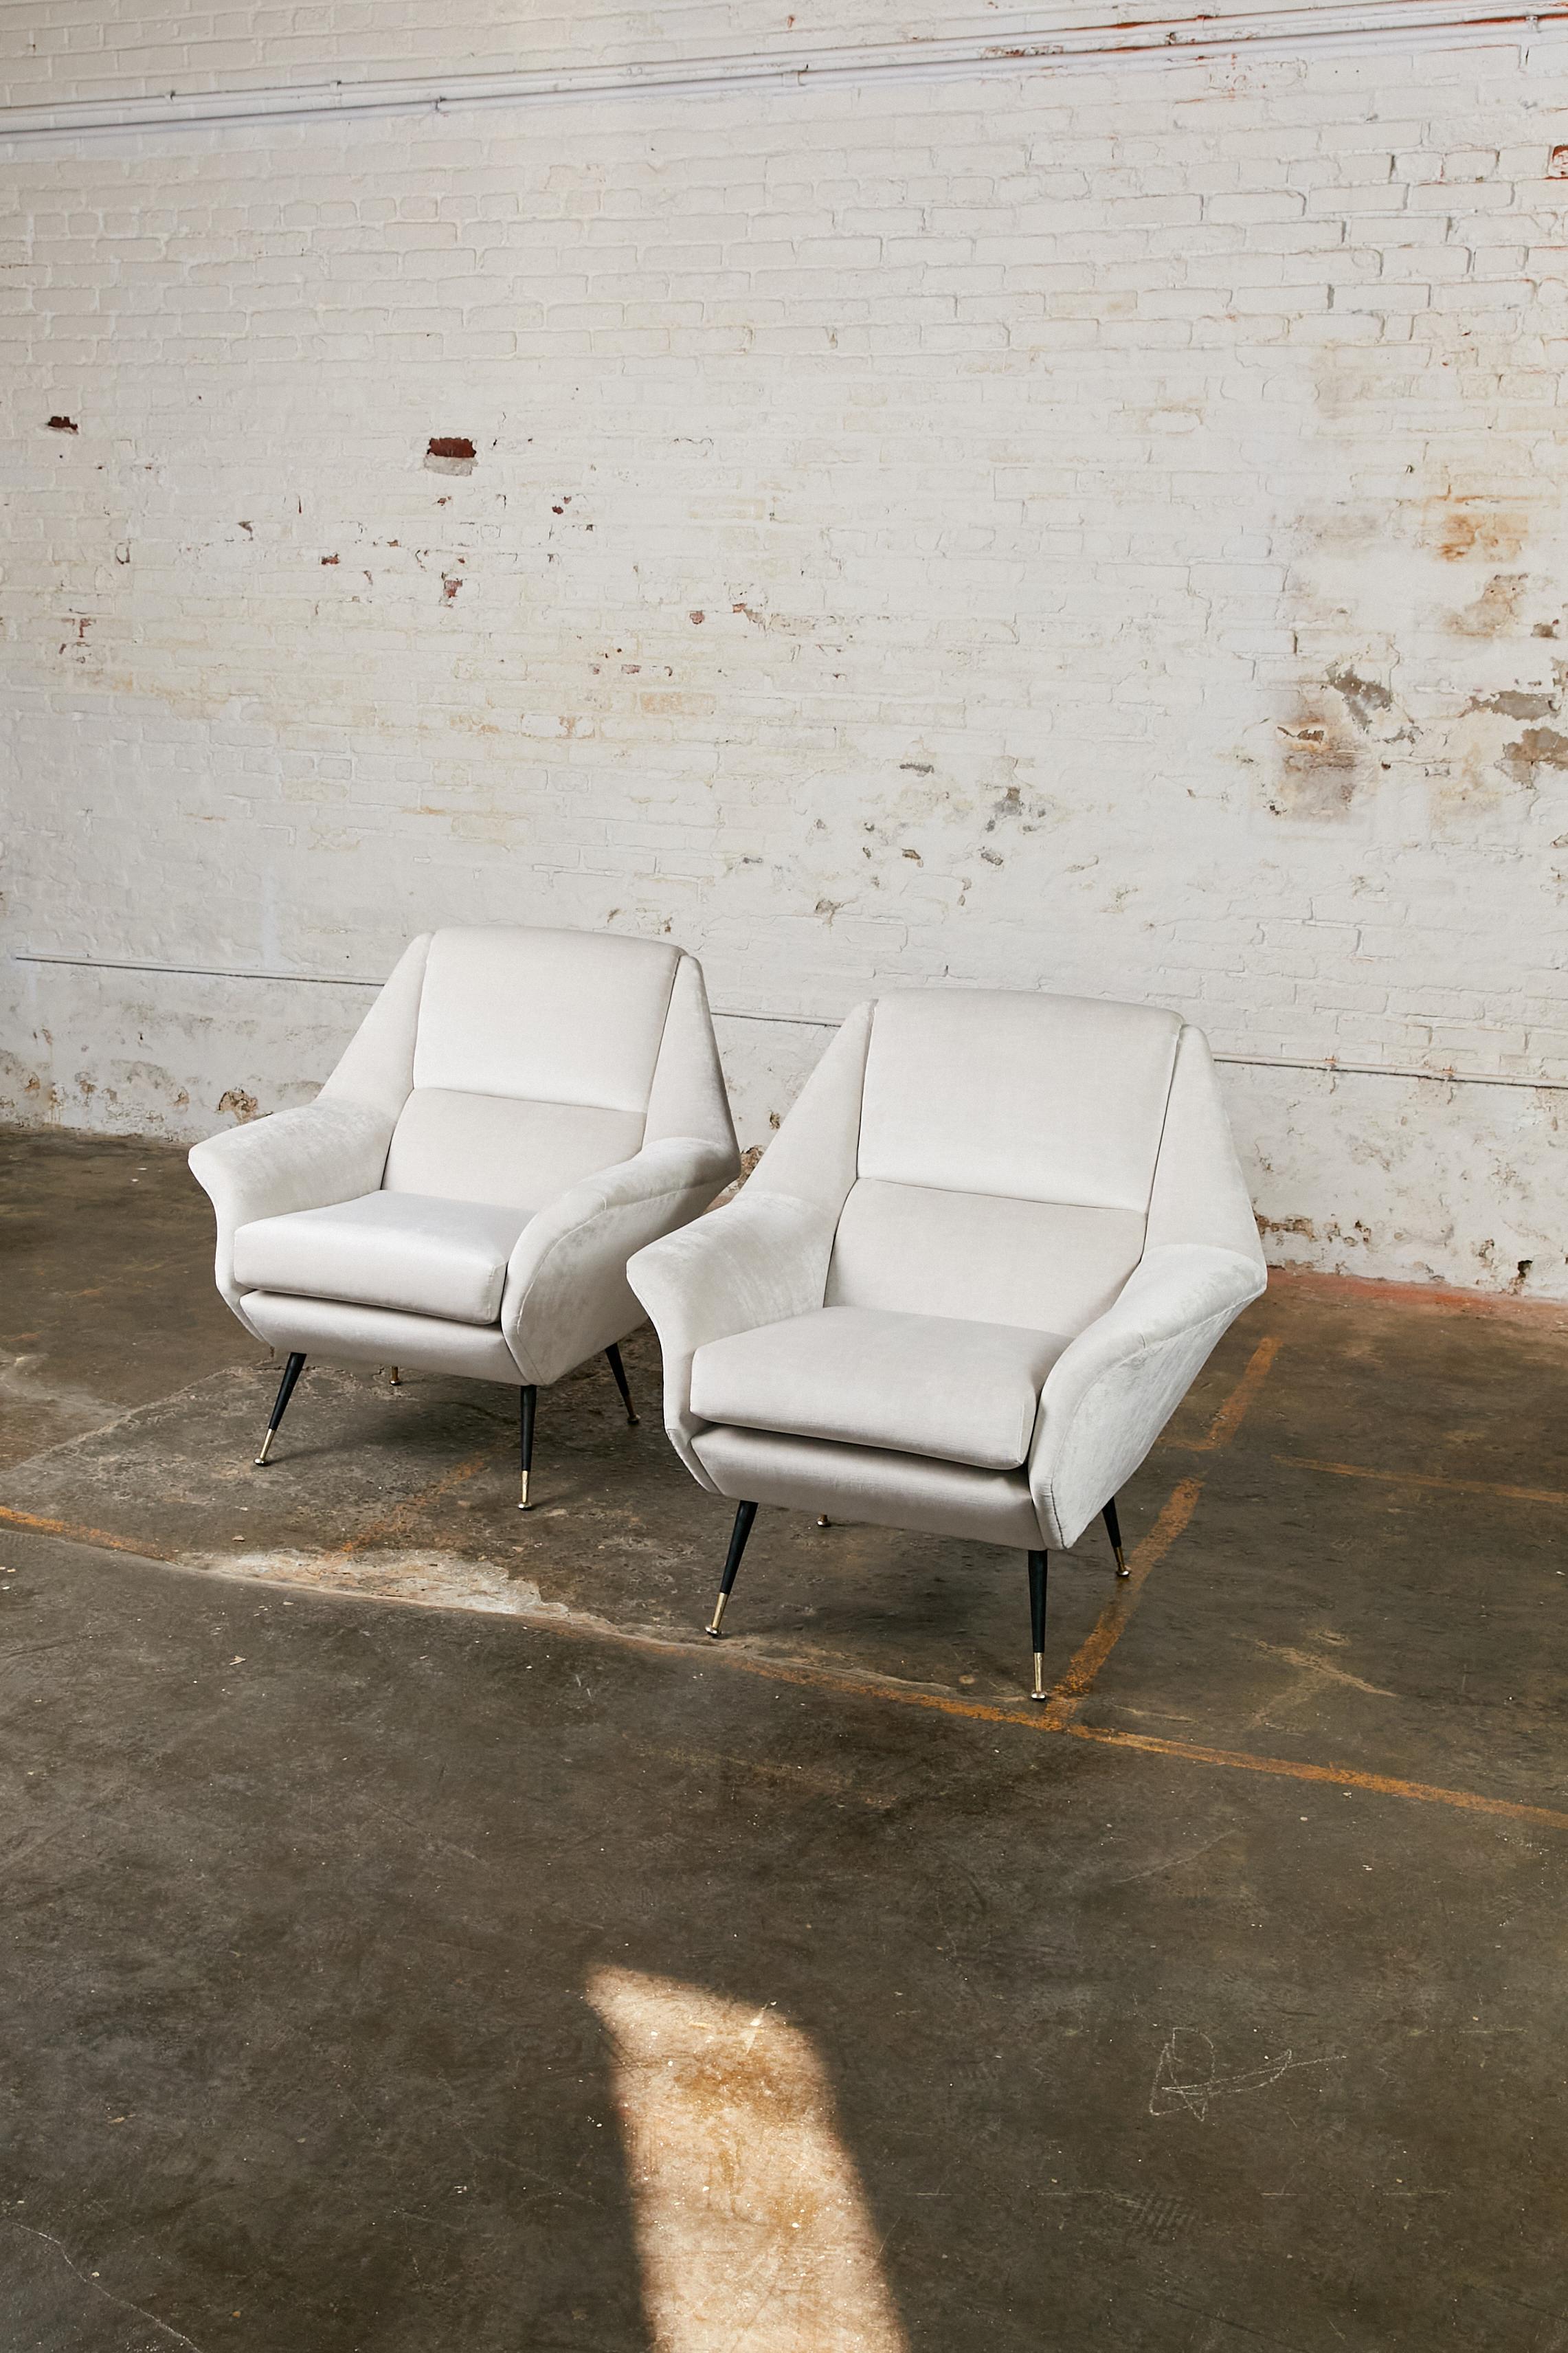 Set of two Italian Mid-Century Modern lounge chairs. They feature a tapered, gently reclined back with a rounded top. The chairs sit on metal feet that finish in rounded concave stands. Fully re-upholstered in light grey velvet.